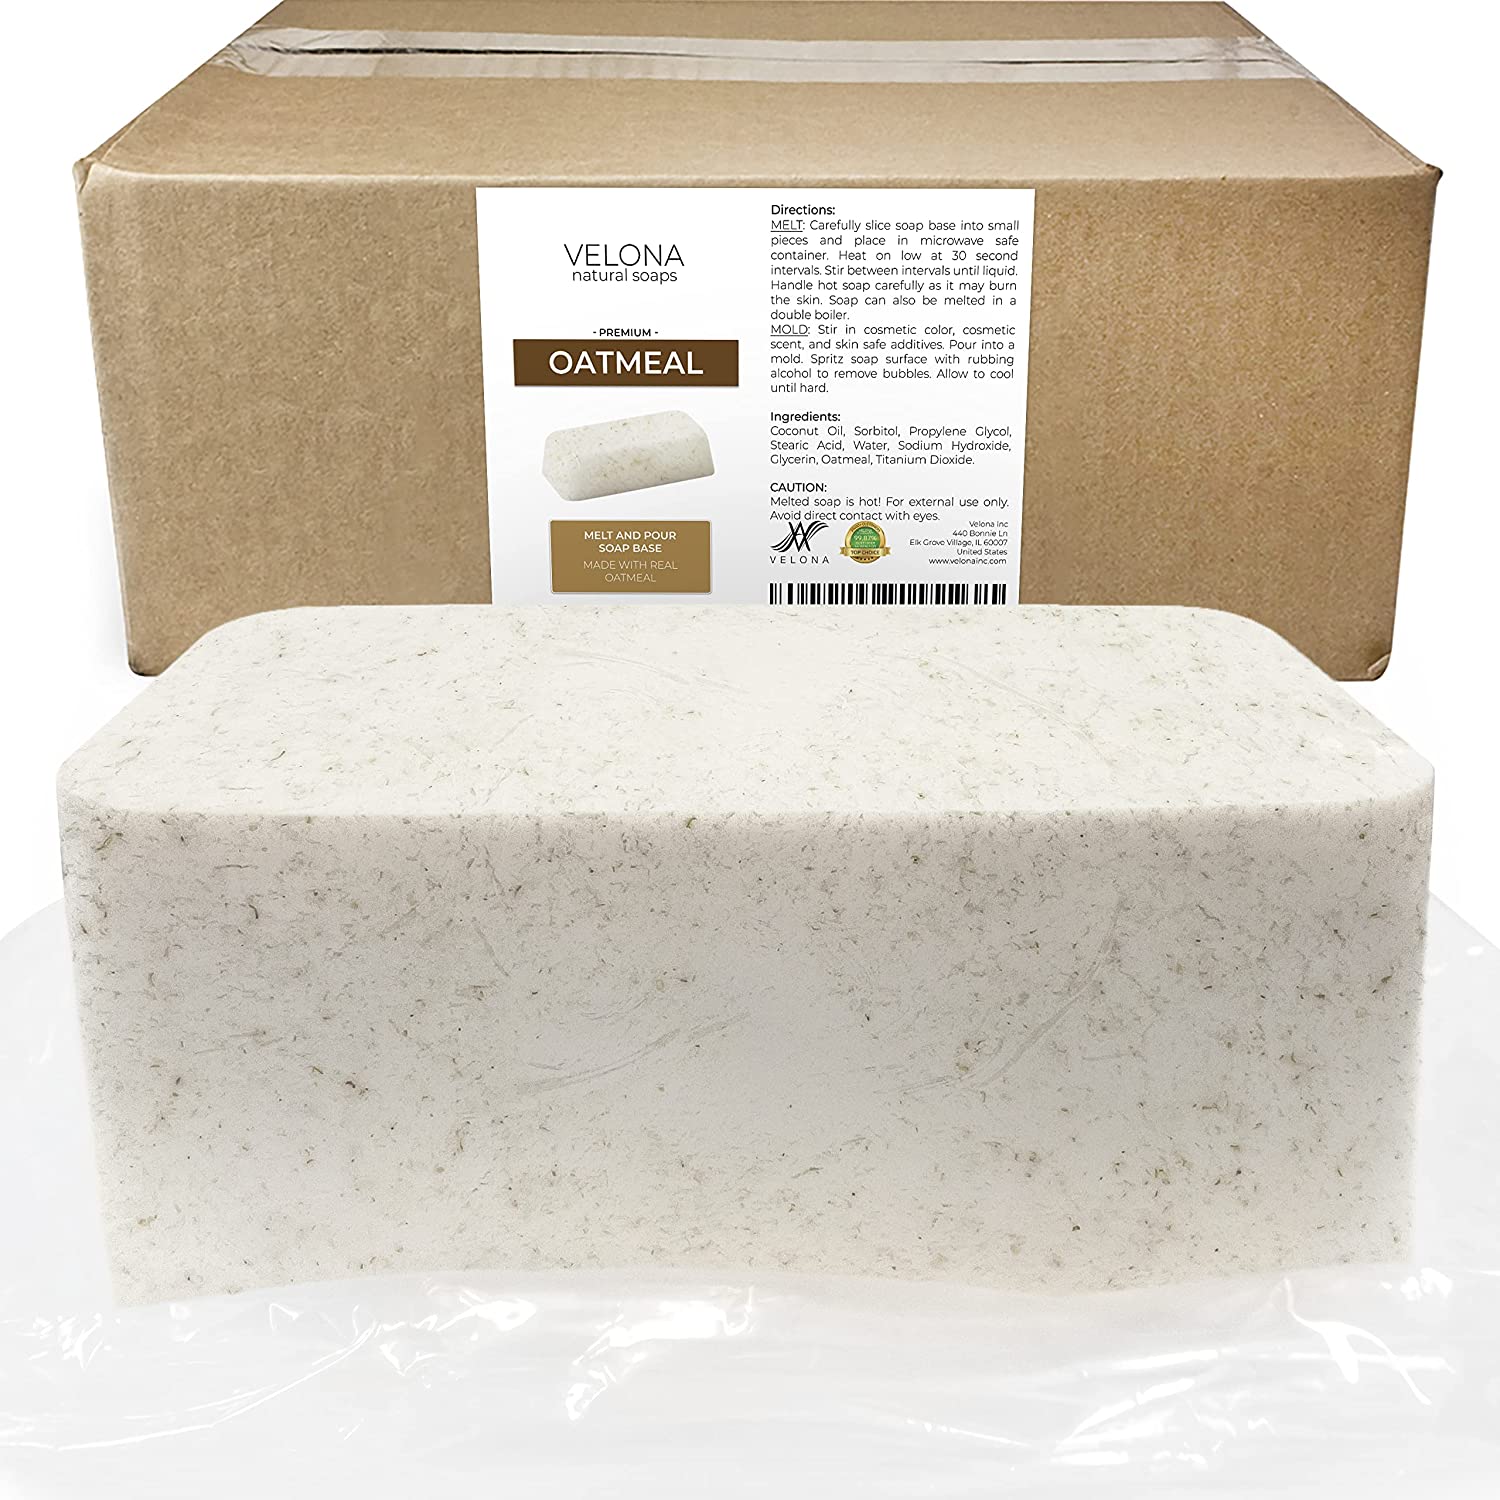 velona 25 LB - Oatmeal Soap Base SLS/SLES free | Melt and Pour | Natural  Bars For The Best Result for Soap-making